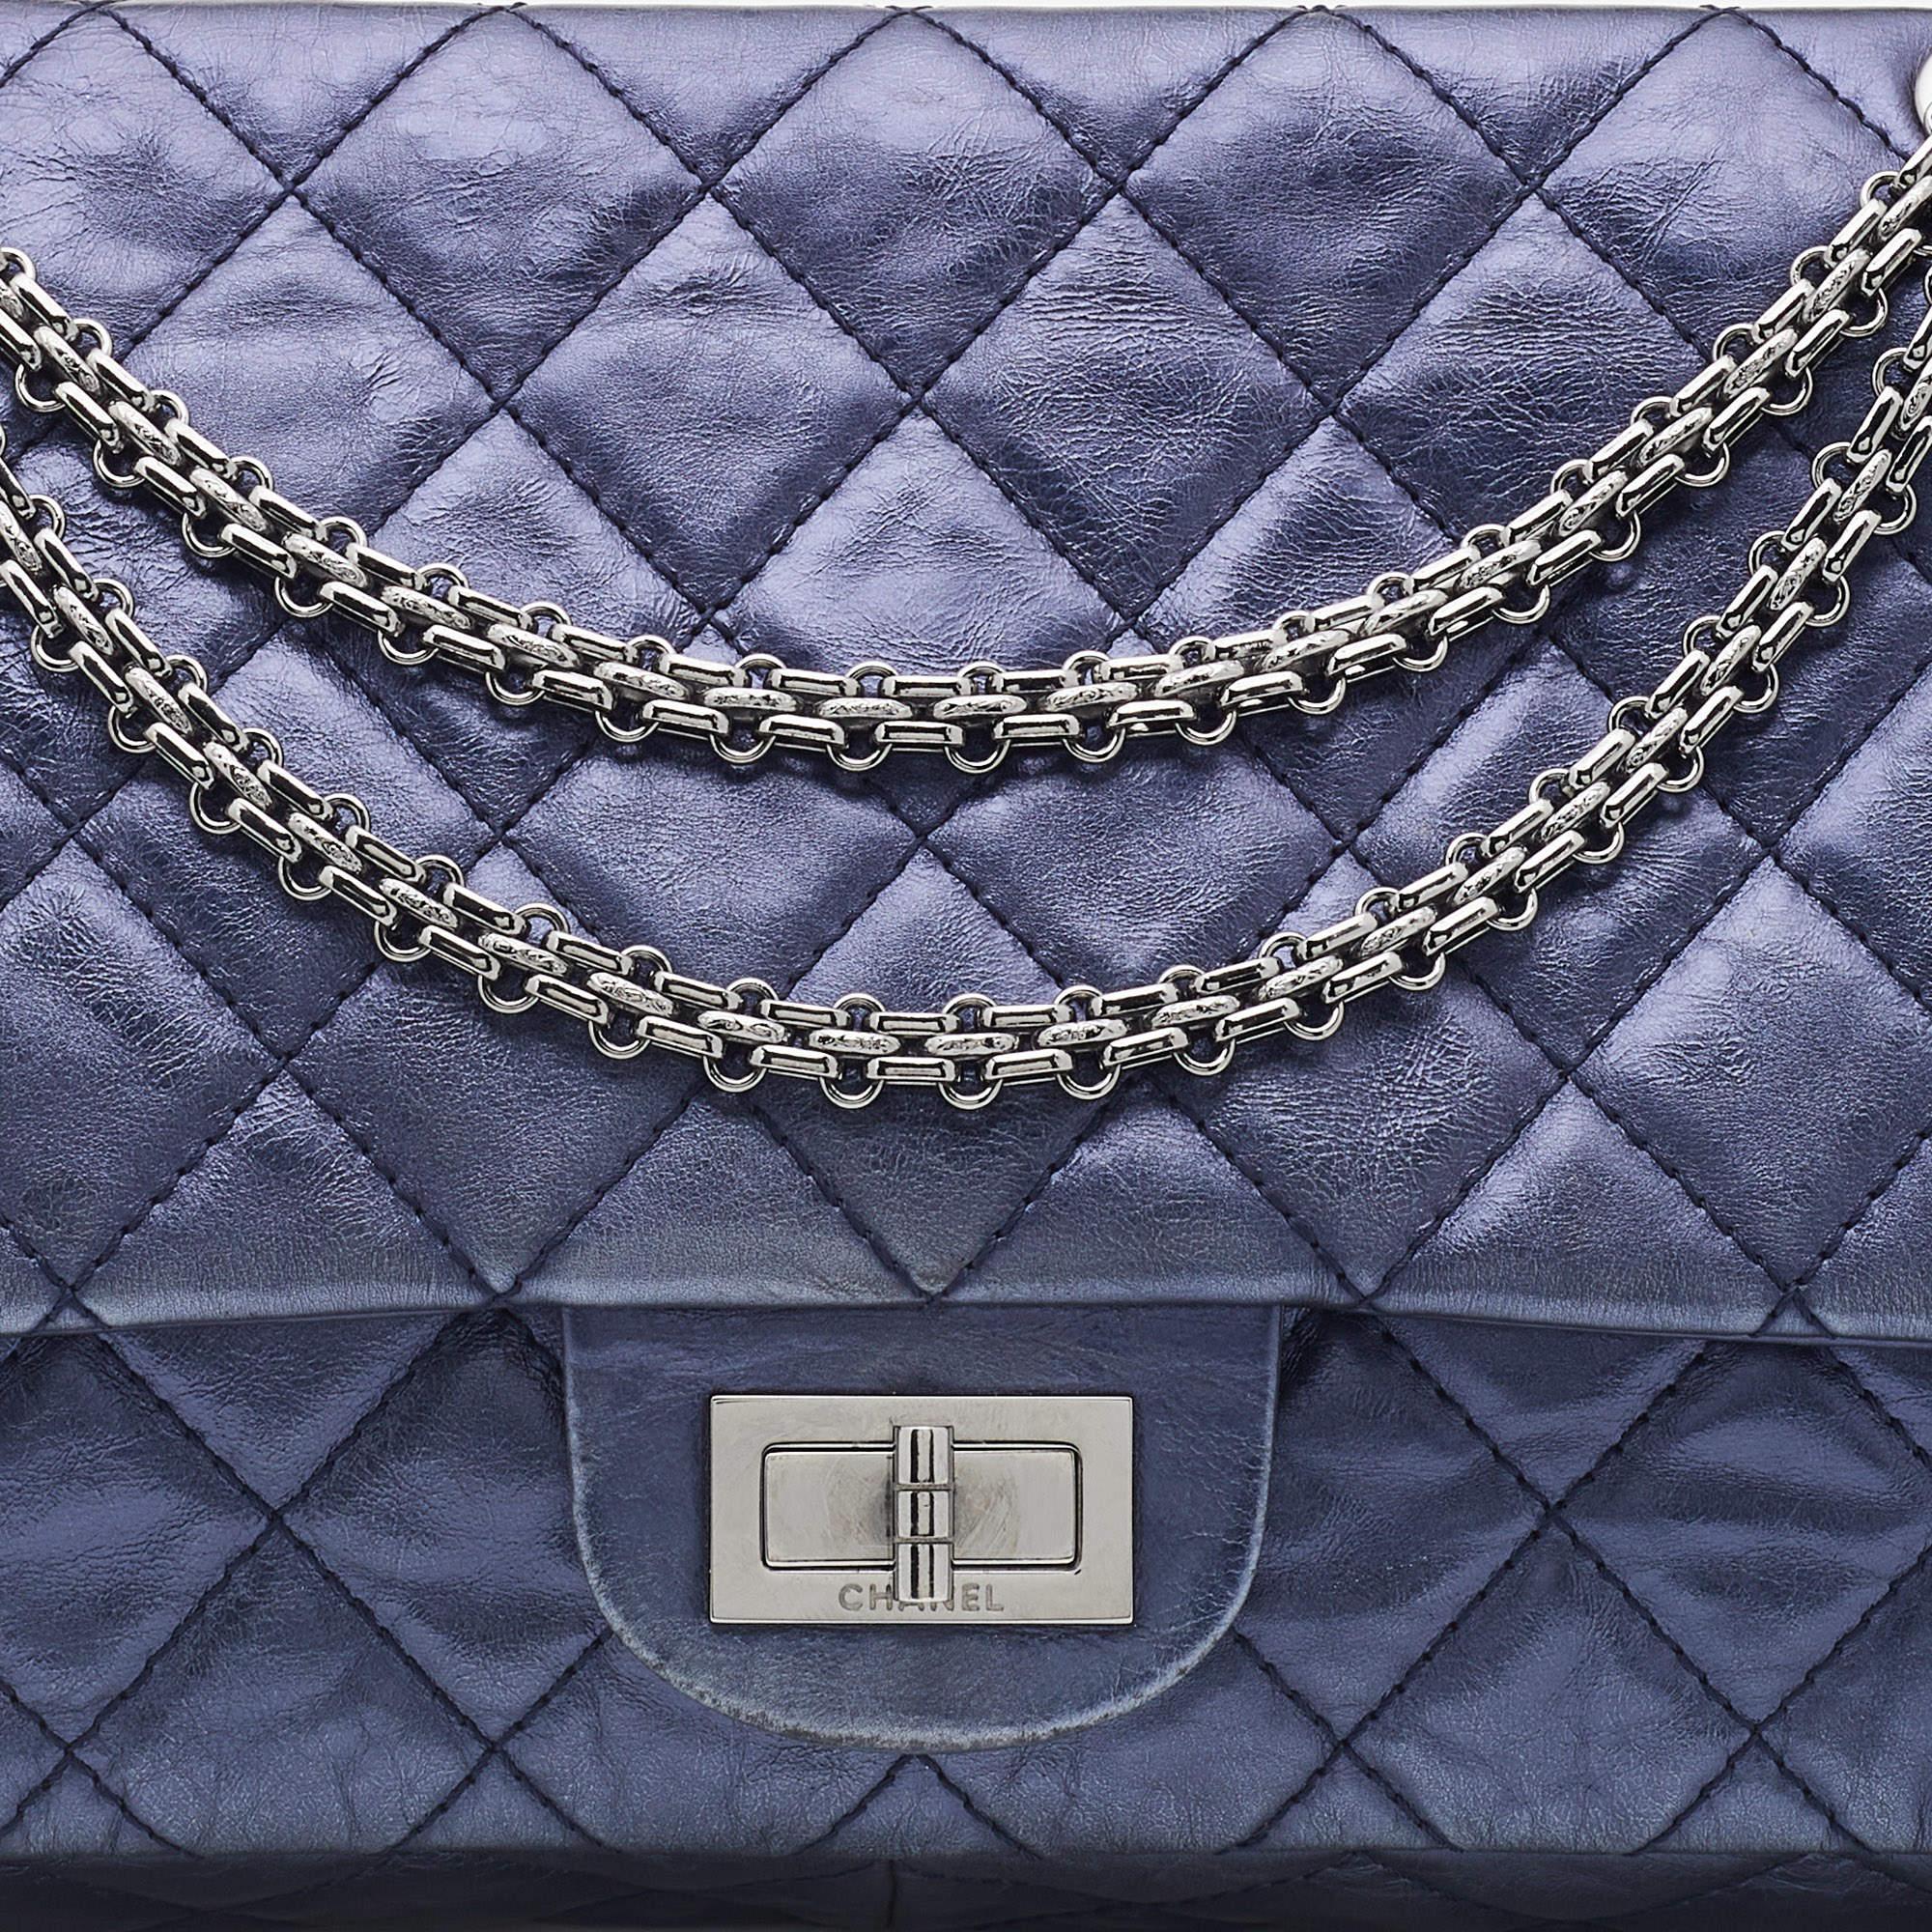 Women's Chanel Blue Quilted Leather Reissue 2.55 Classic 227 Bag